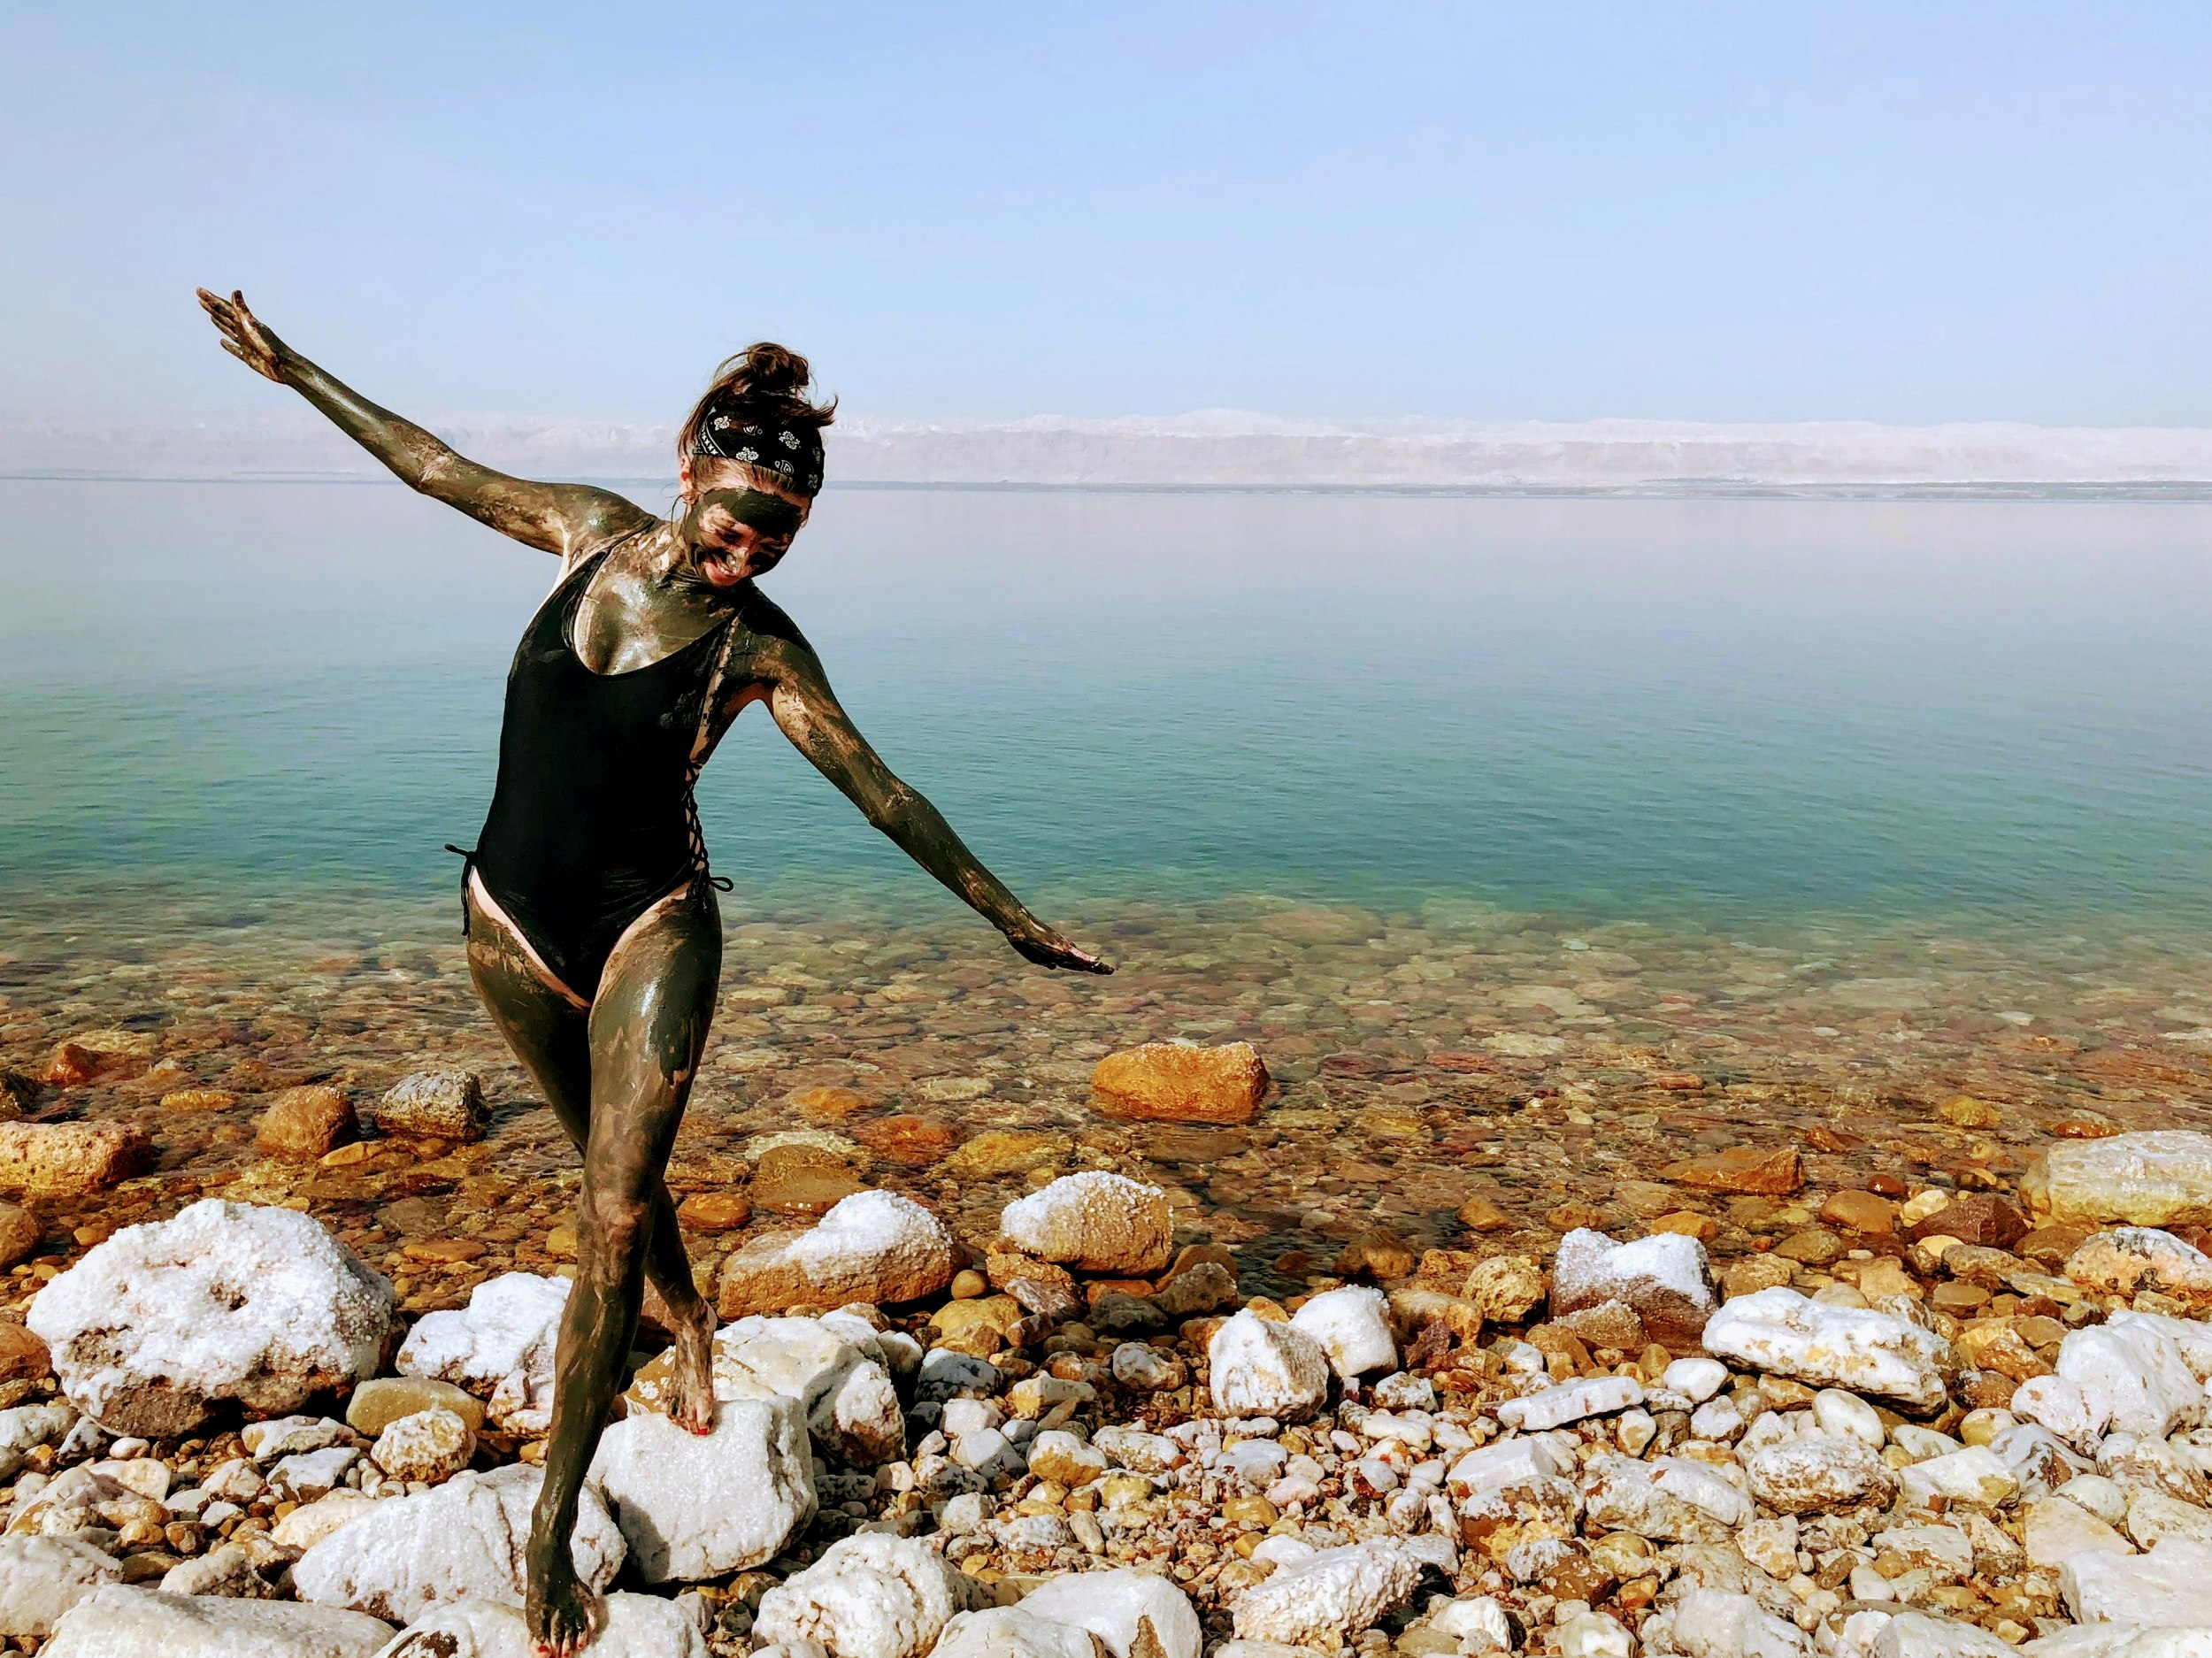 A woman in a black bathing suit stands on some white rocks at the shore of the Dead Sea; her arms are spread wide and her legs are crossed, while her legs, arms and face is covered in black mud.